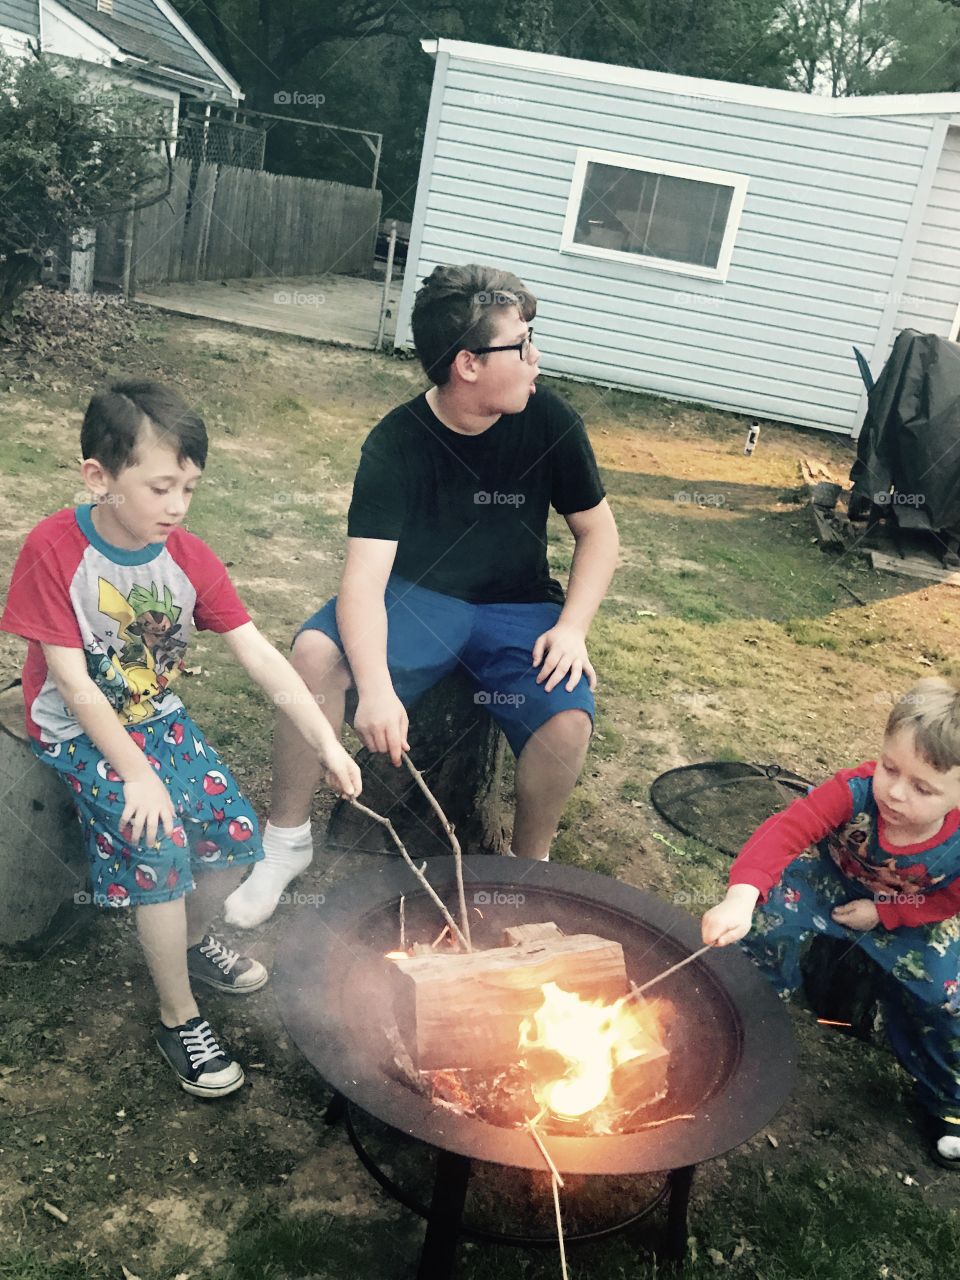 Backyard boys at it again for smore s’mores 